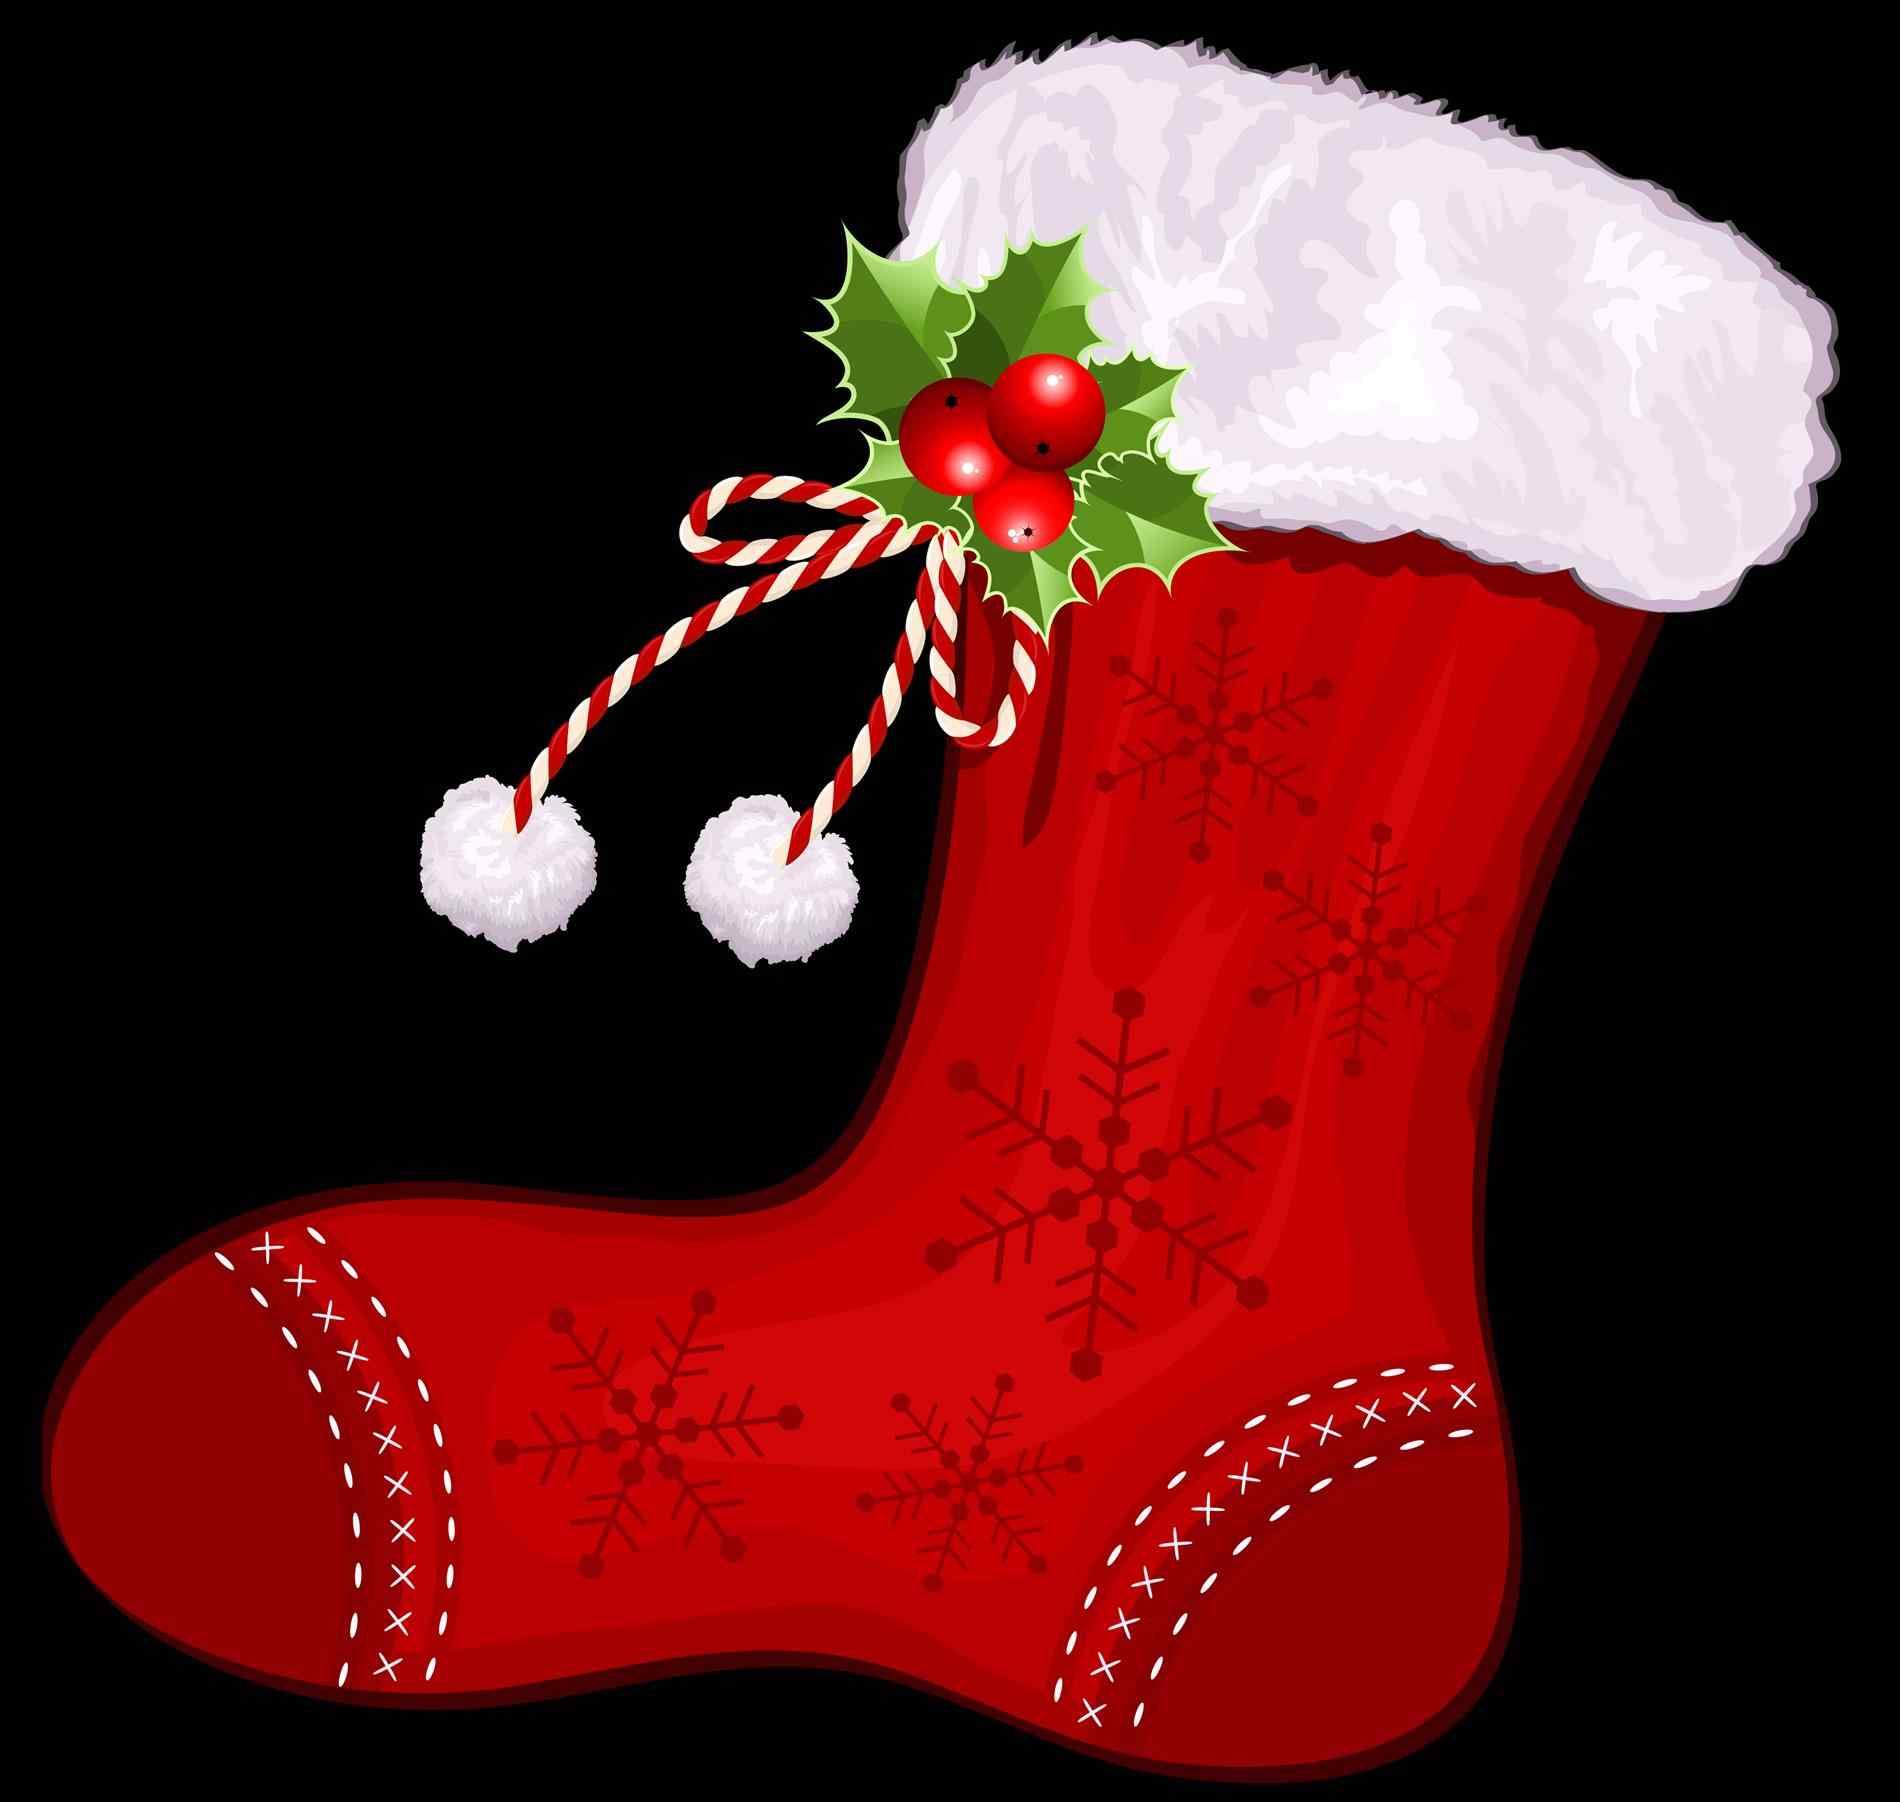 Pictures Of Christmas Stockings clipart